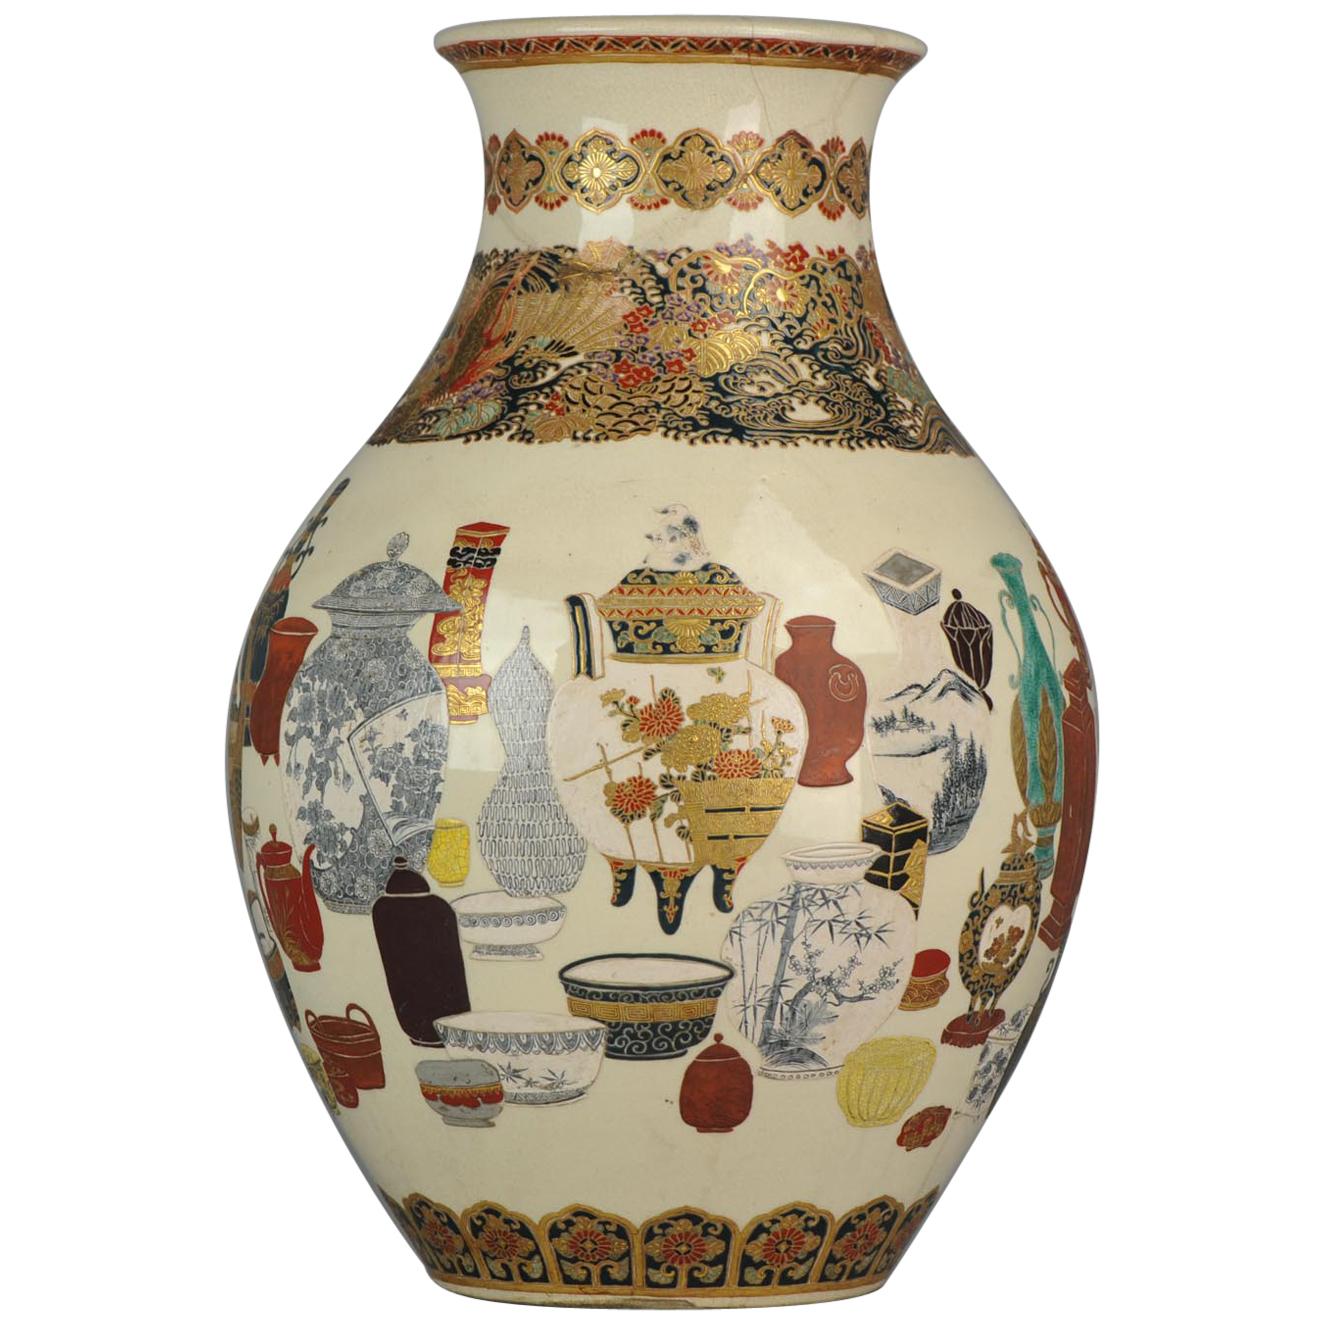 Antique 19th Century Japanese Satsuma Vase Decorated with All Types of Porcelain